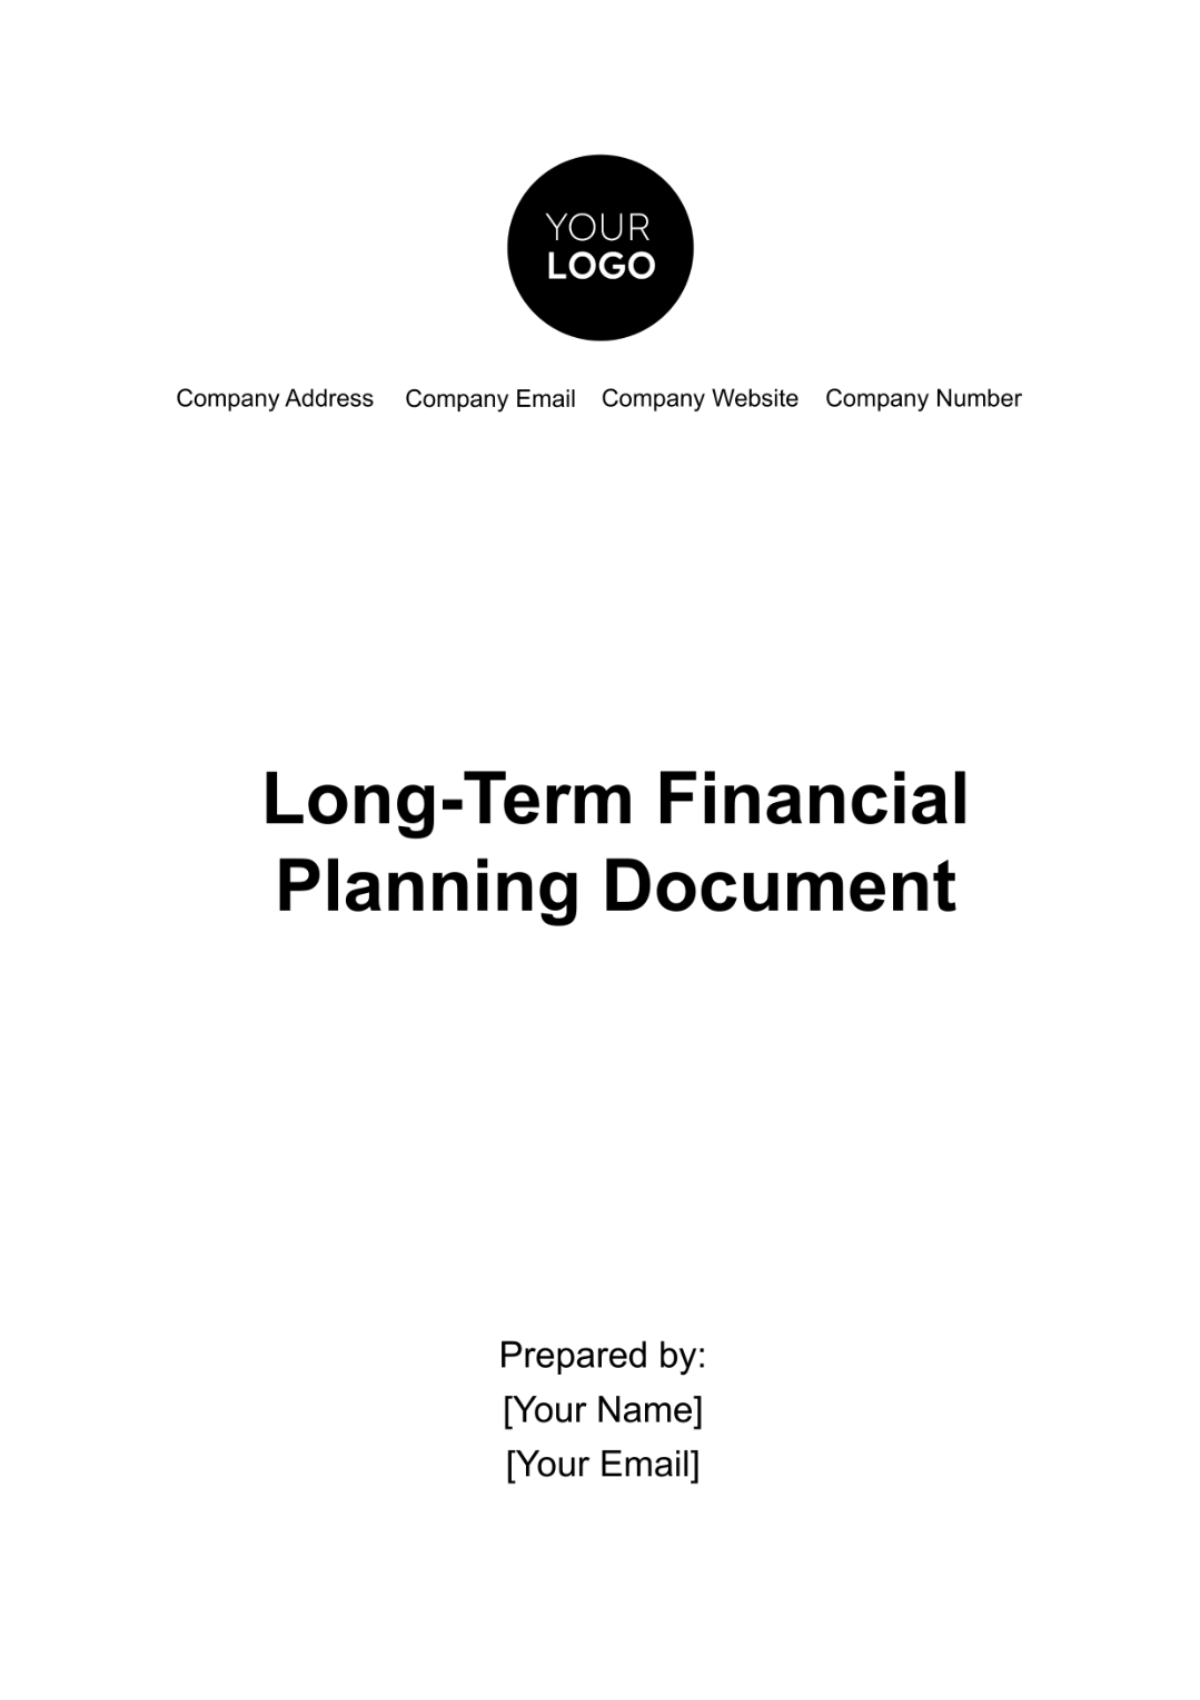 Free Long-Term Financial Planning Document Template